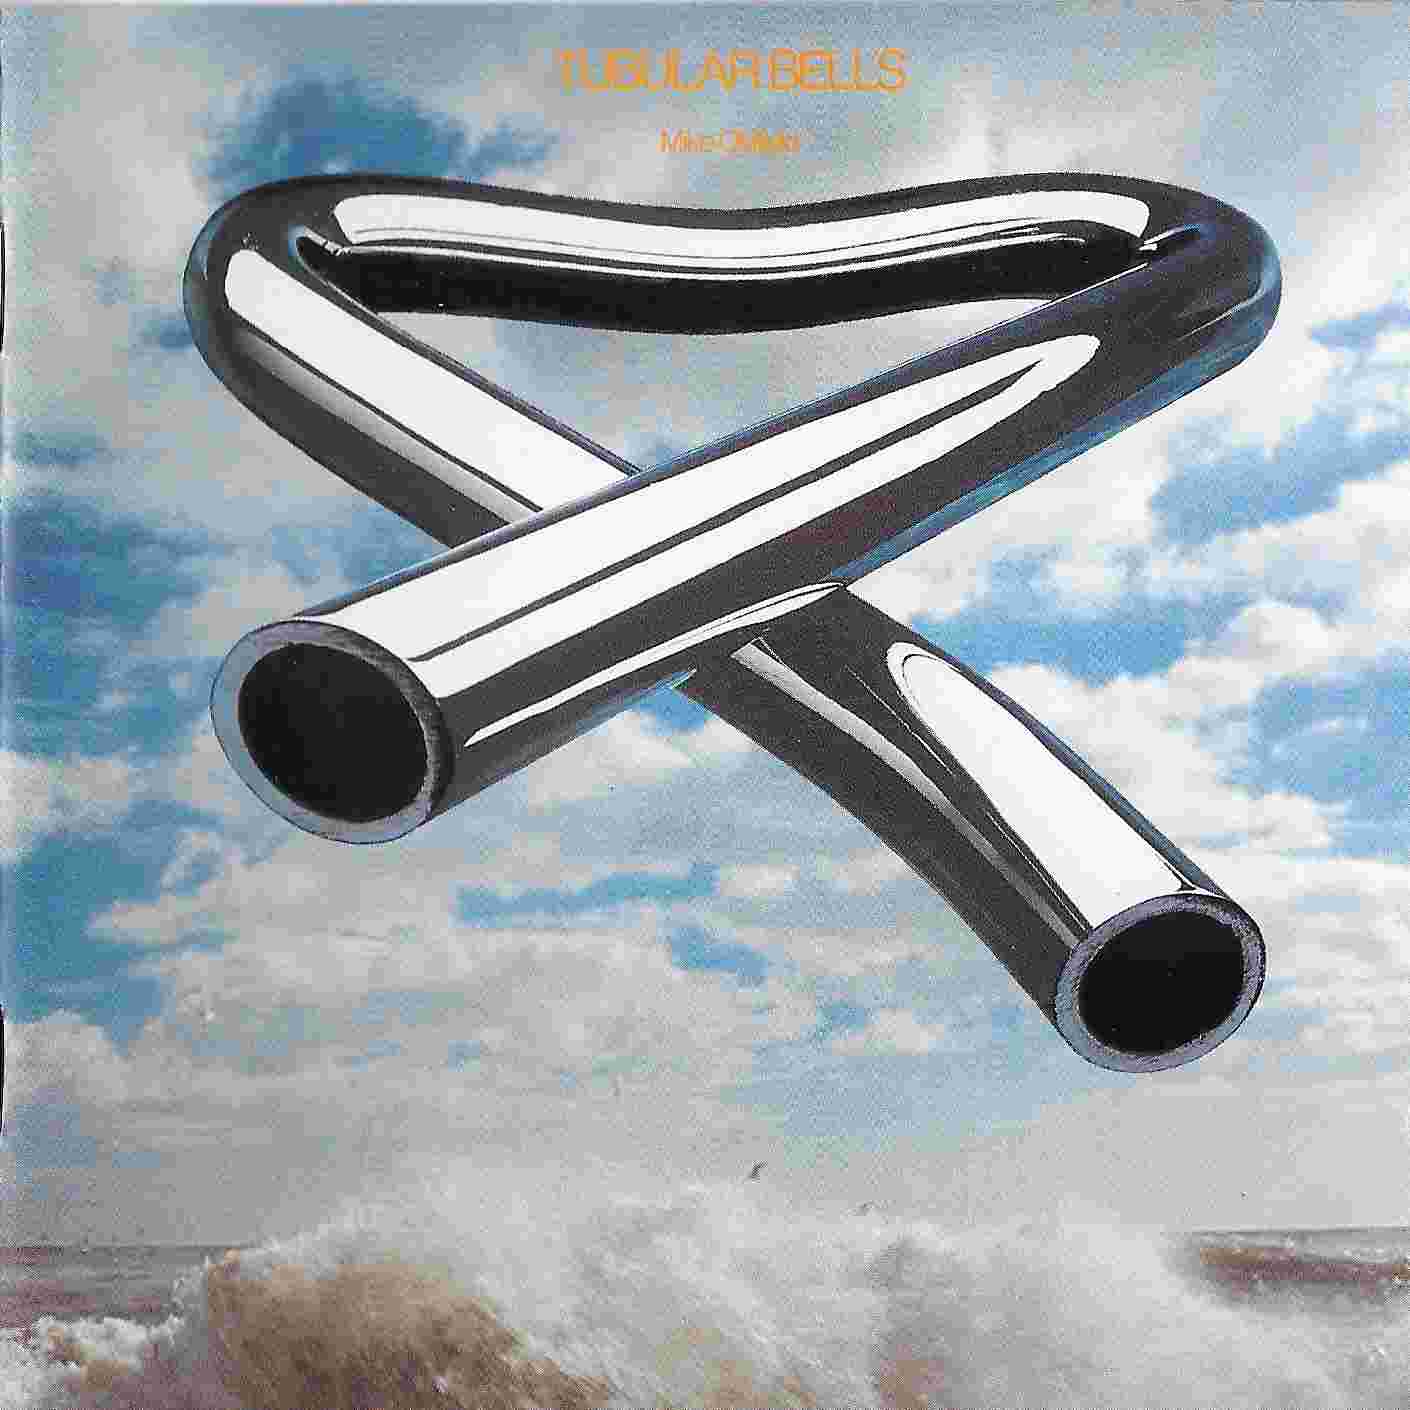 Picture of Tubular bells by artist Mike Oldfield 